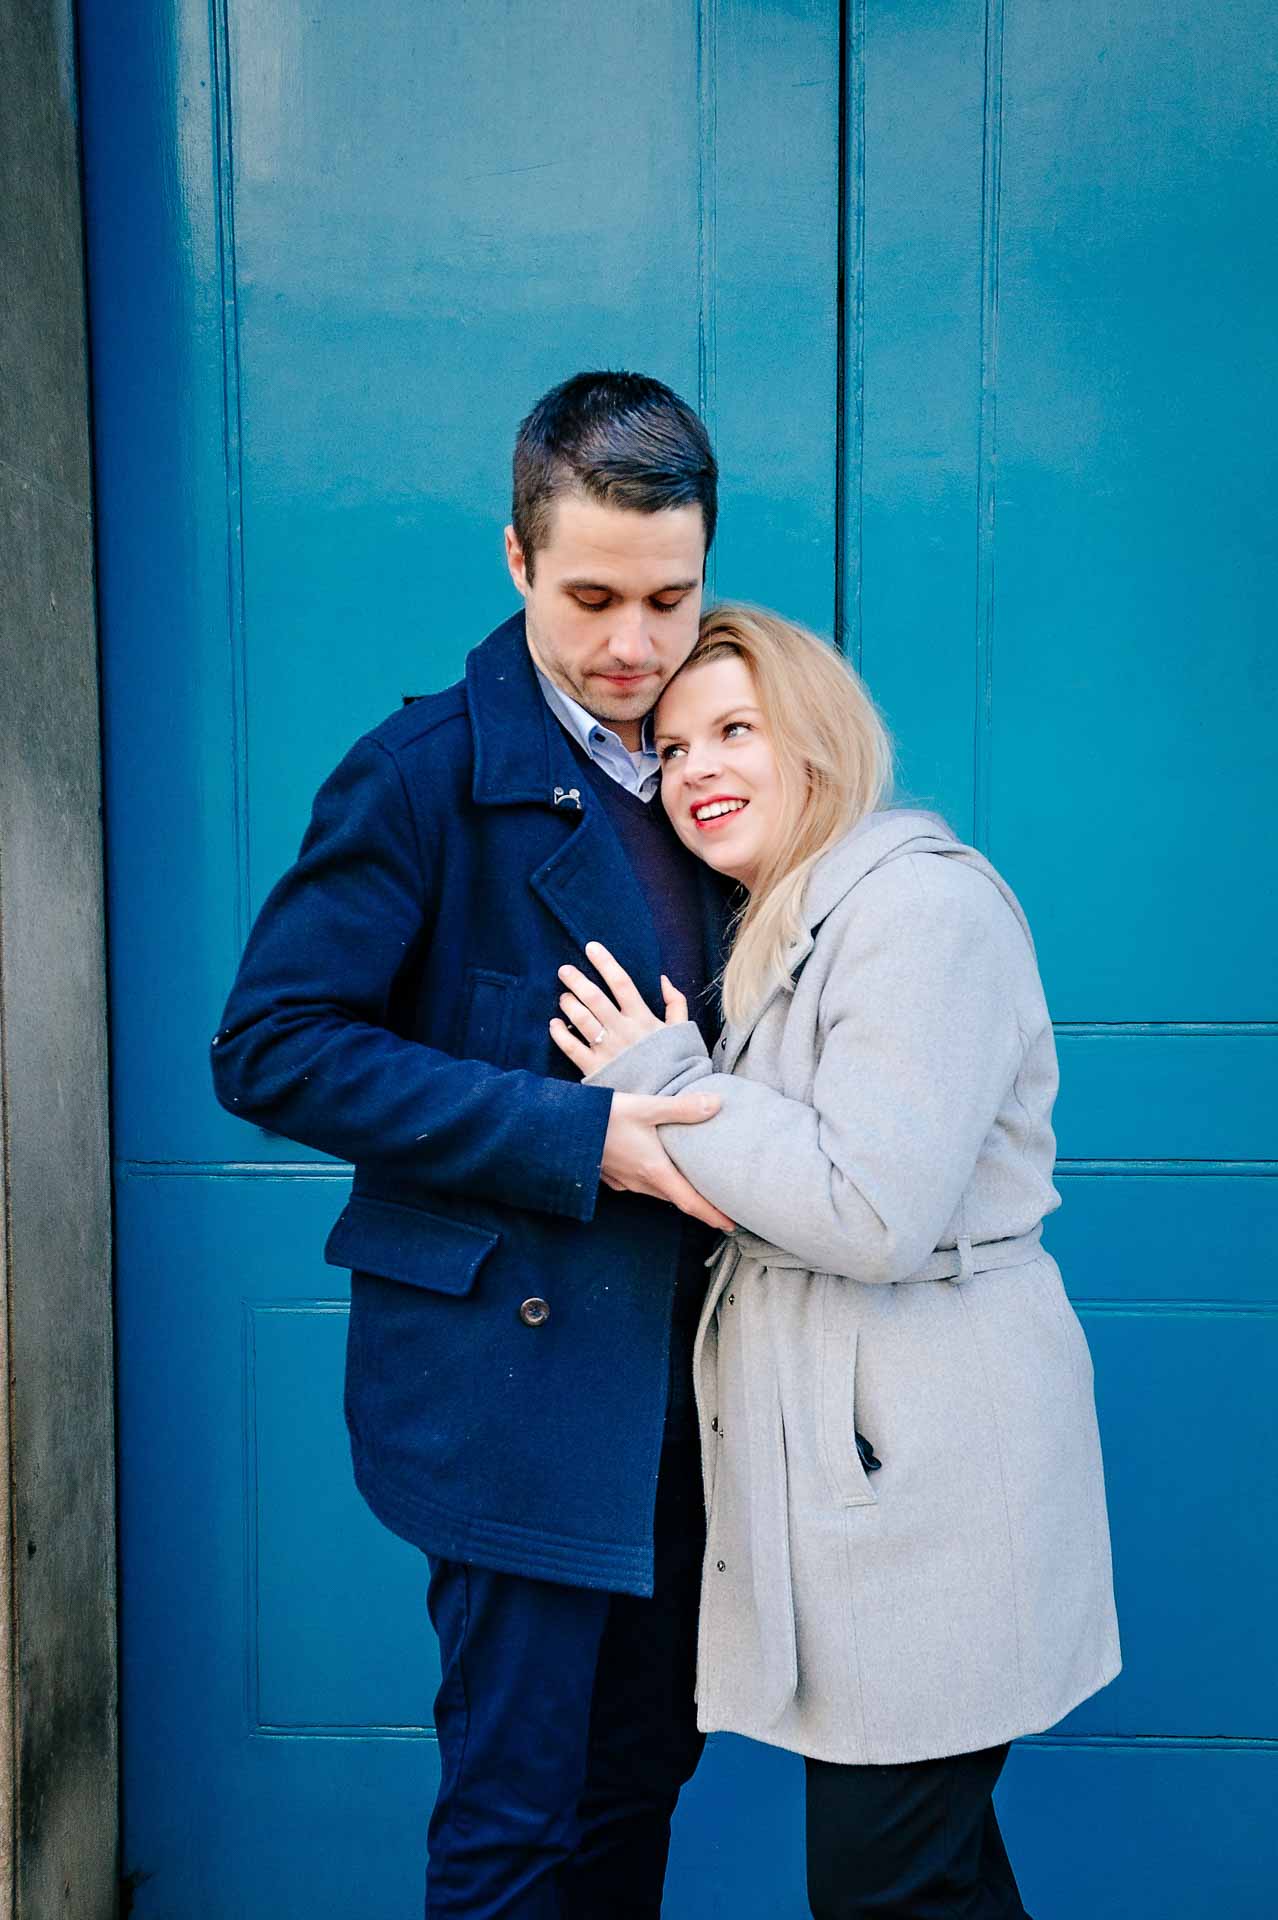 Newly-engaged couple in front of blue doorway with woman looking very happy